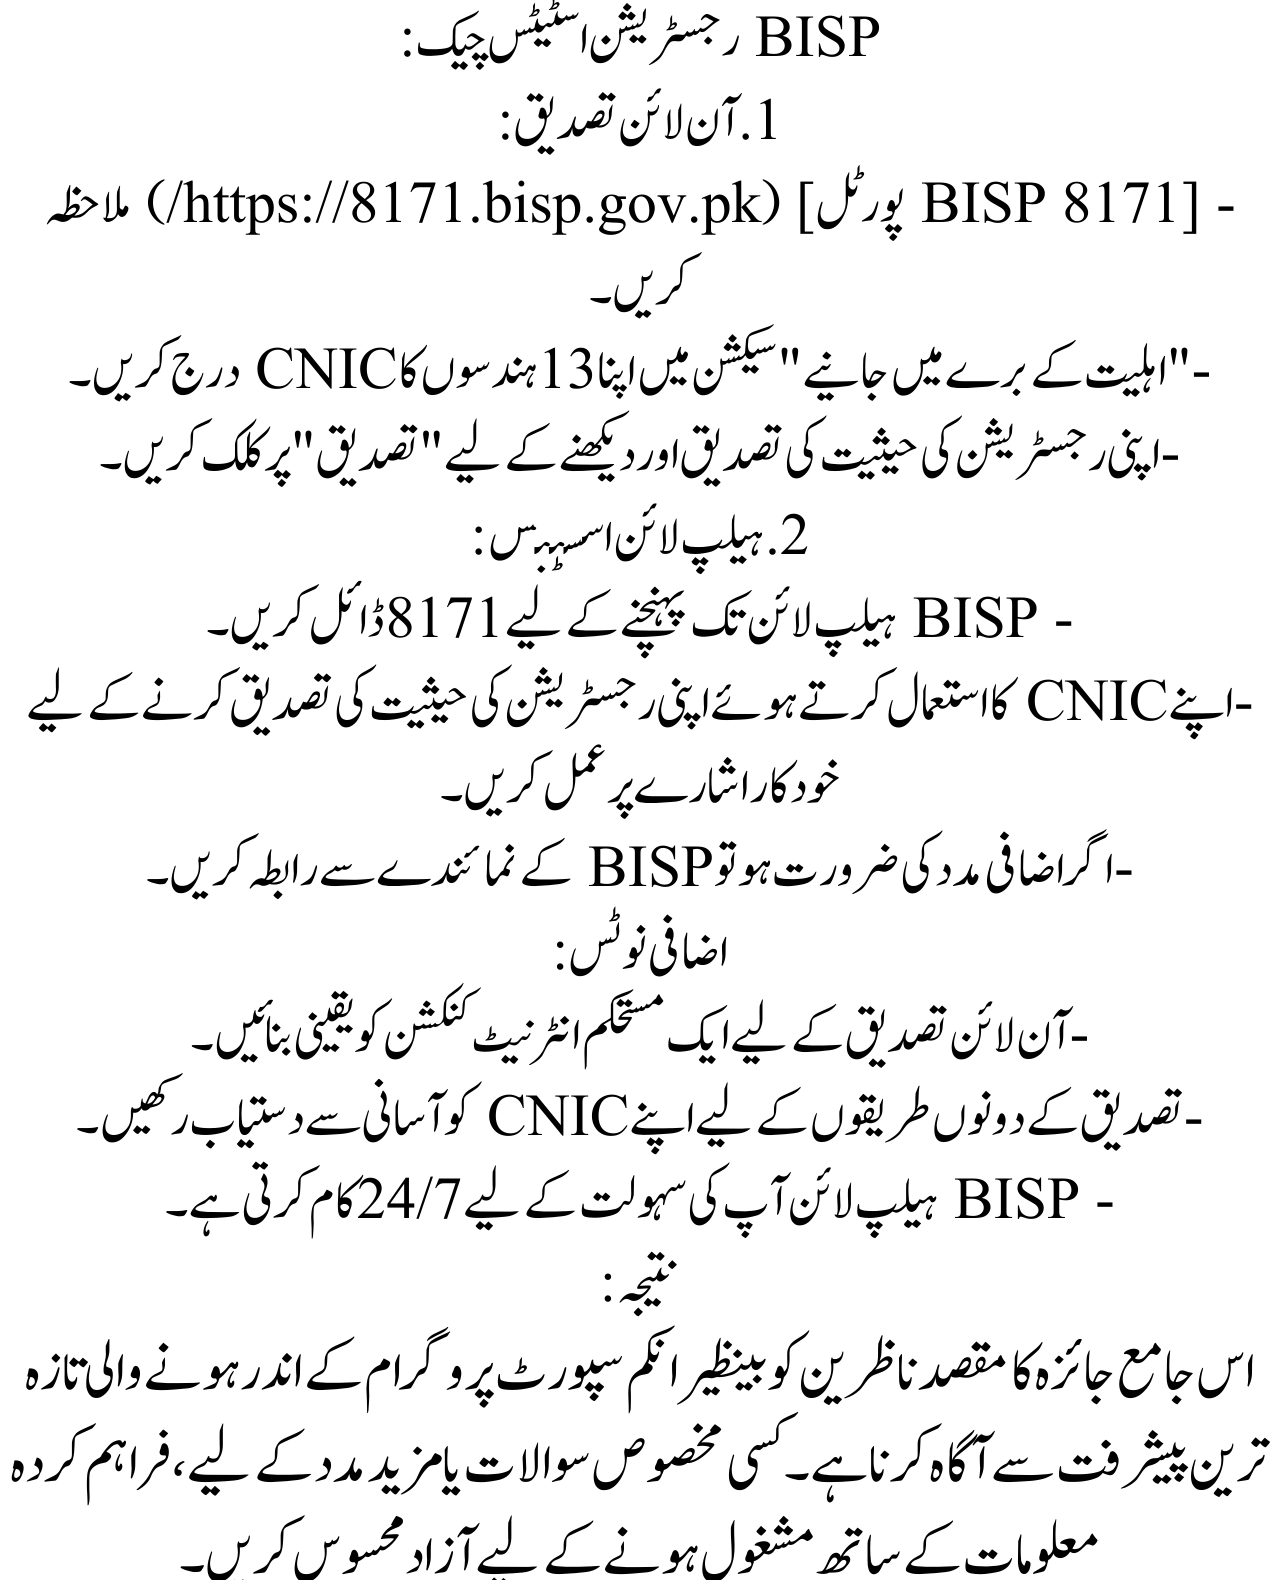 BISP QIST Launch on 15th Date